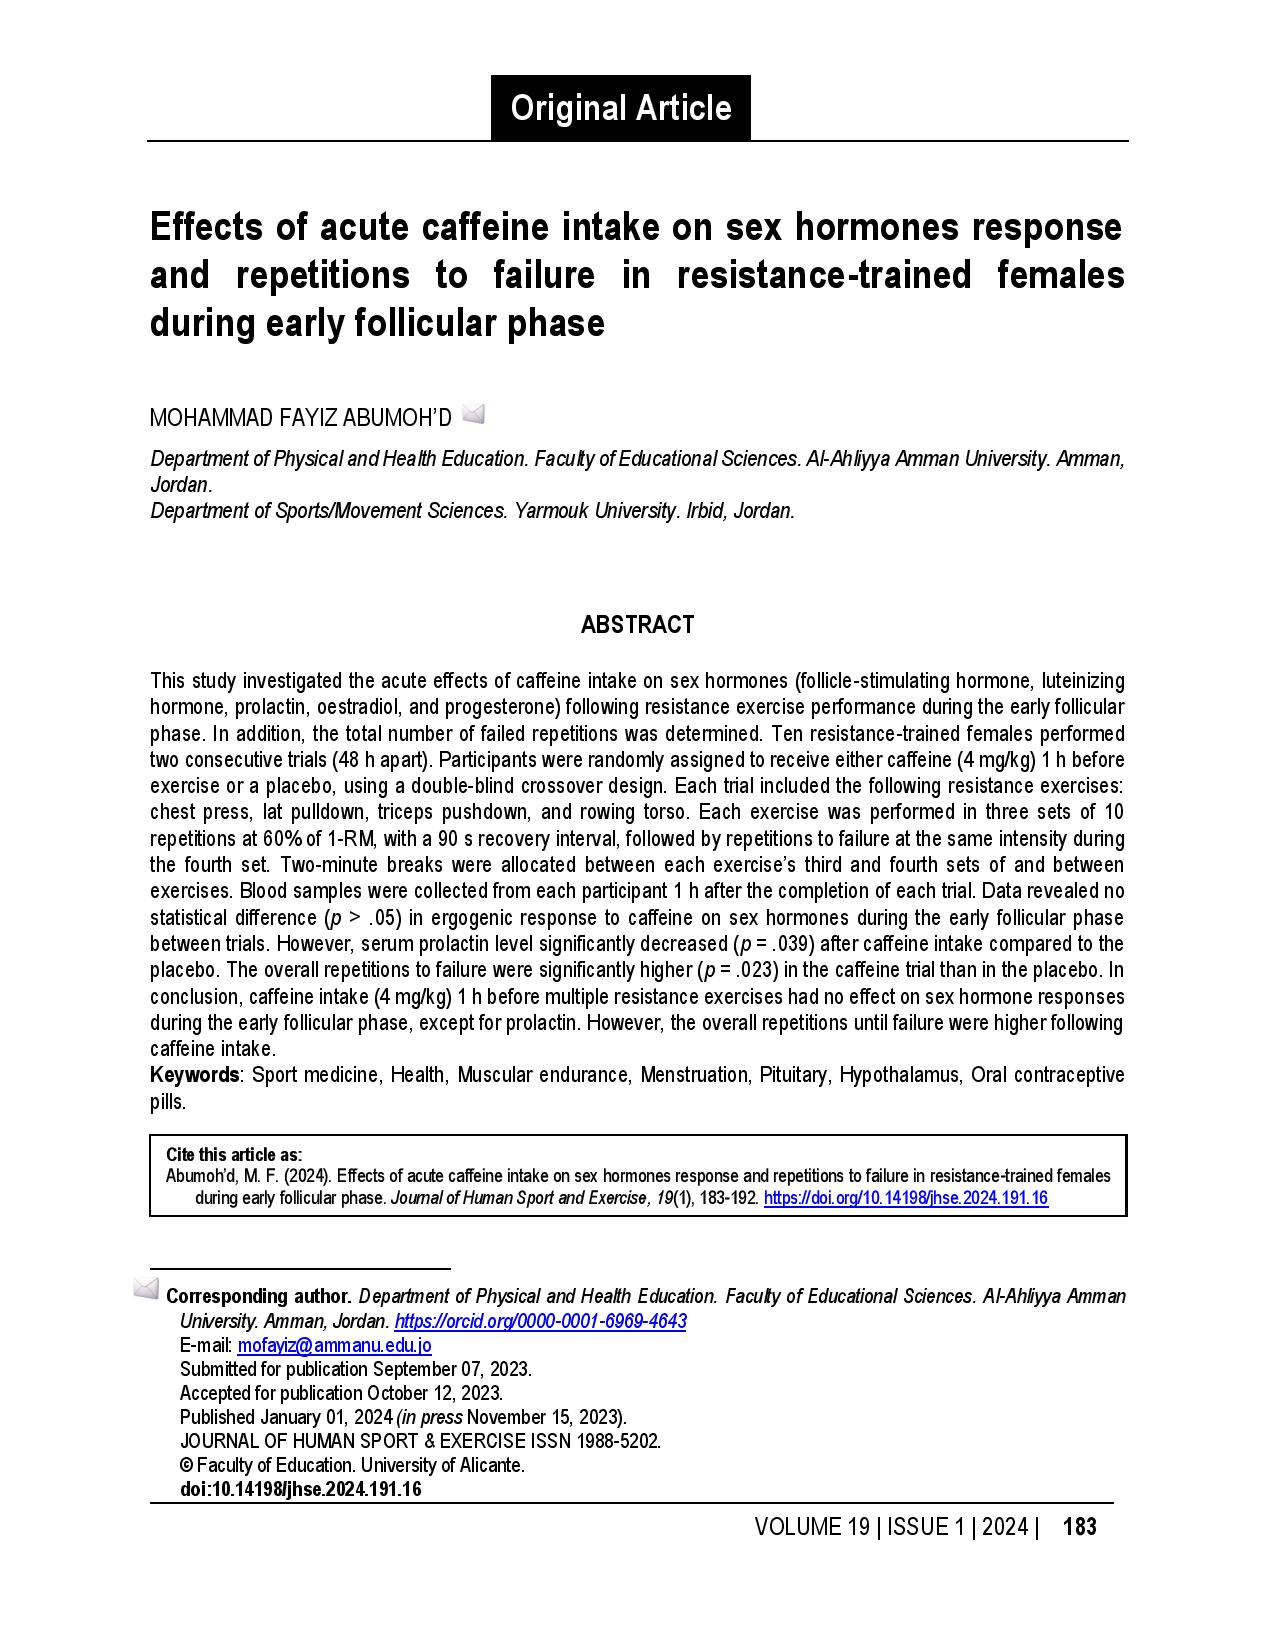 Effects of acute caffeine intake on sex hormones response and repetitions to failure in resistance-trained females during early follicular phase